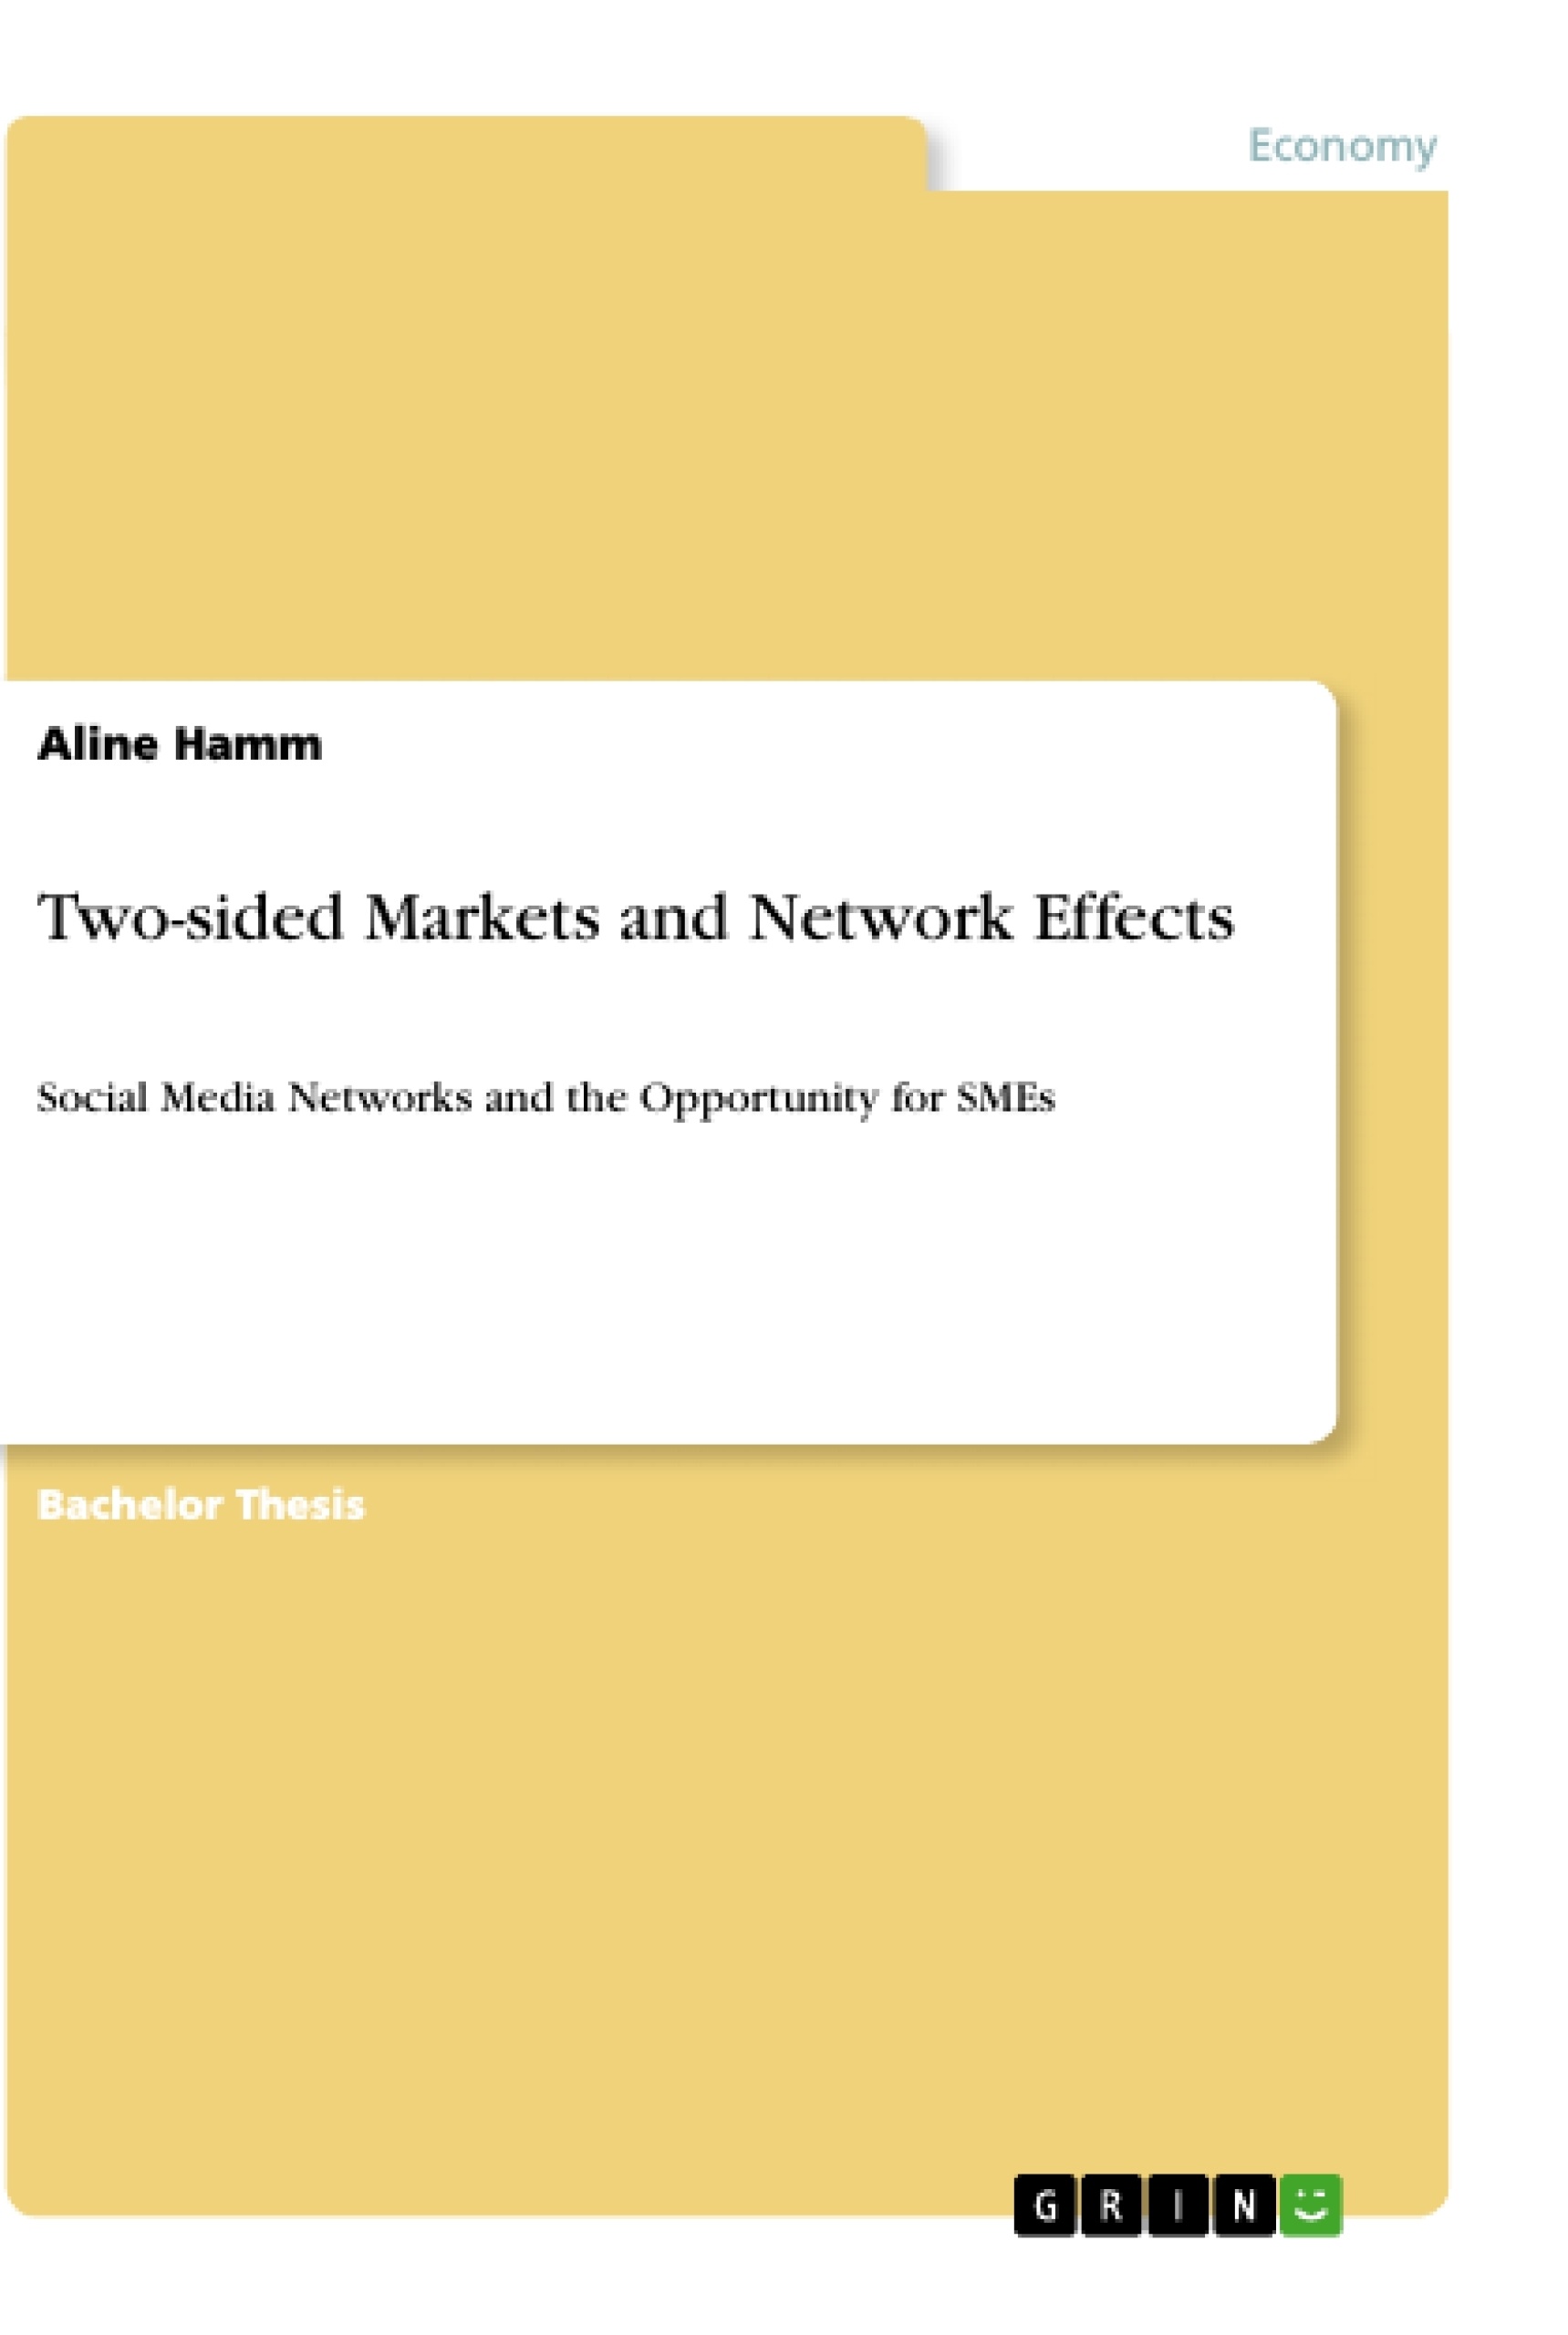 Title: Two-sided Markets and Network Effects